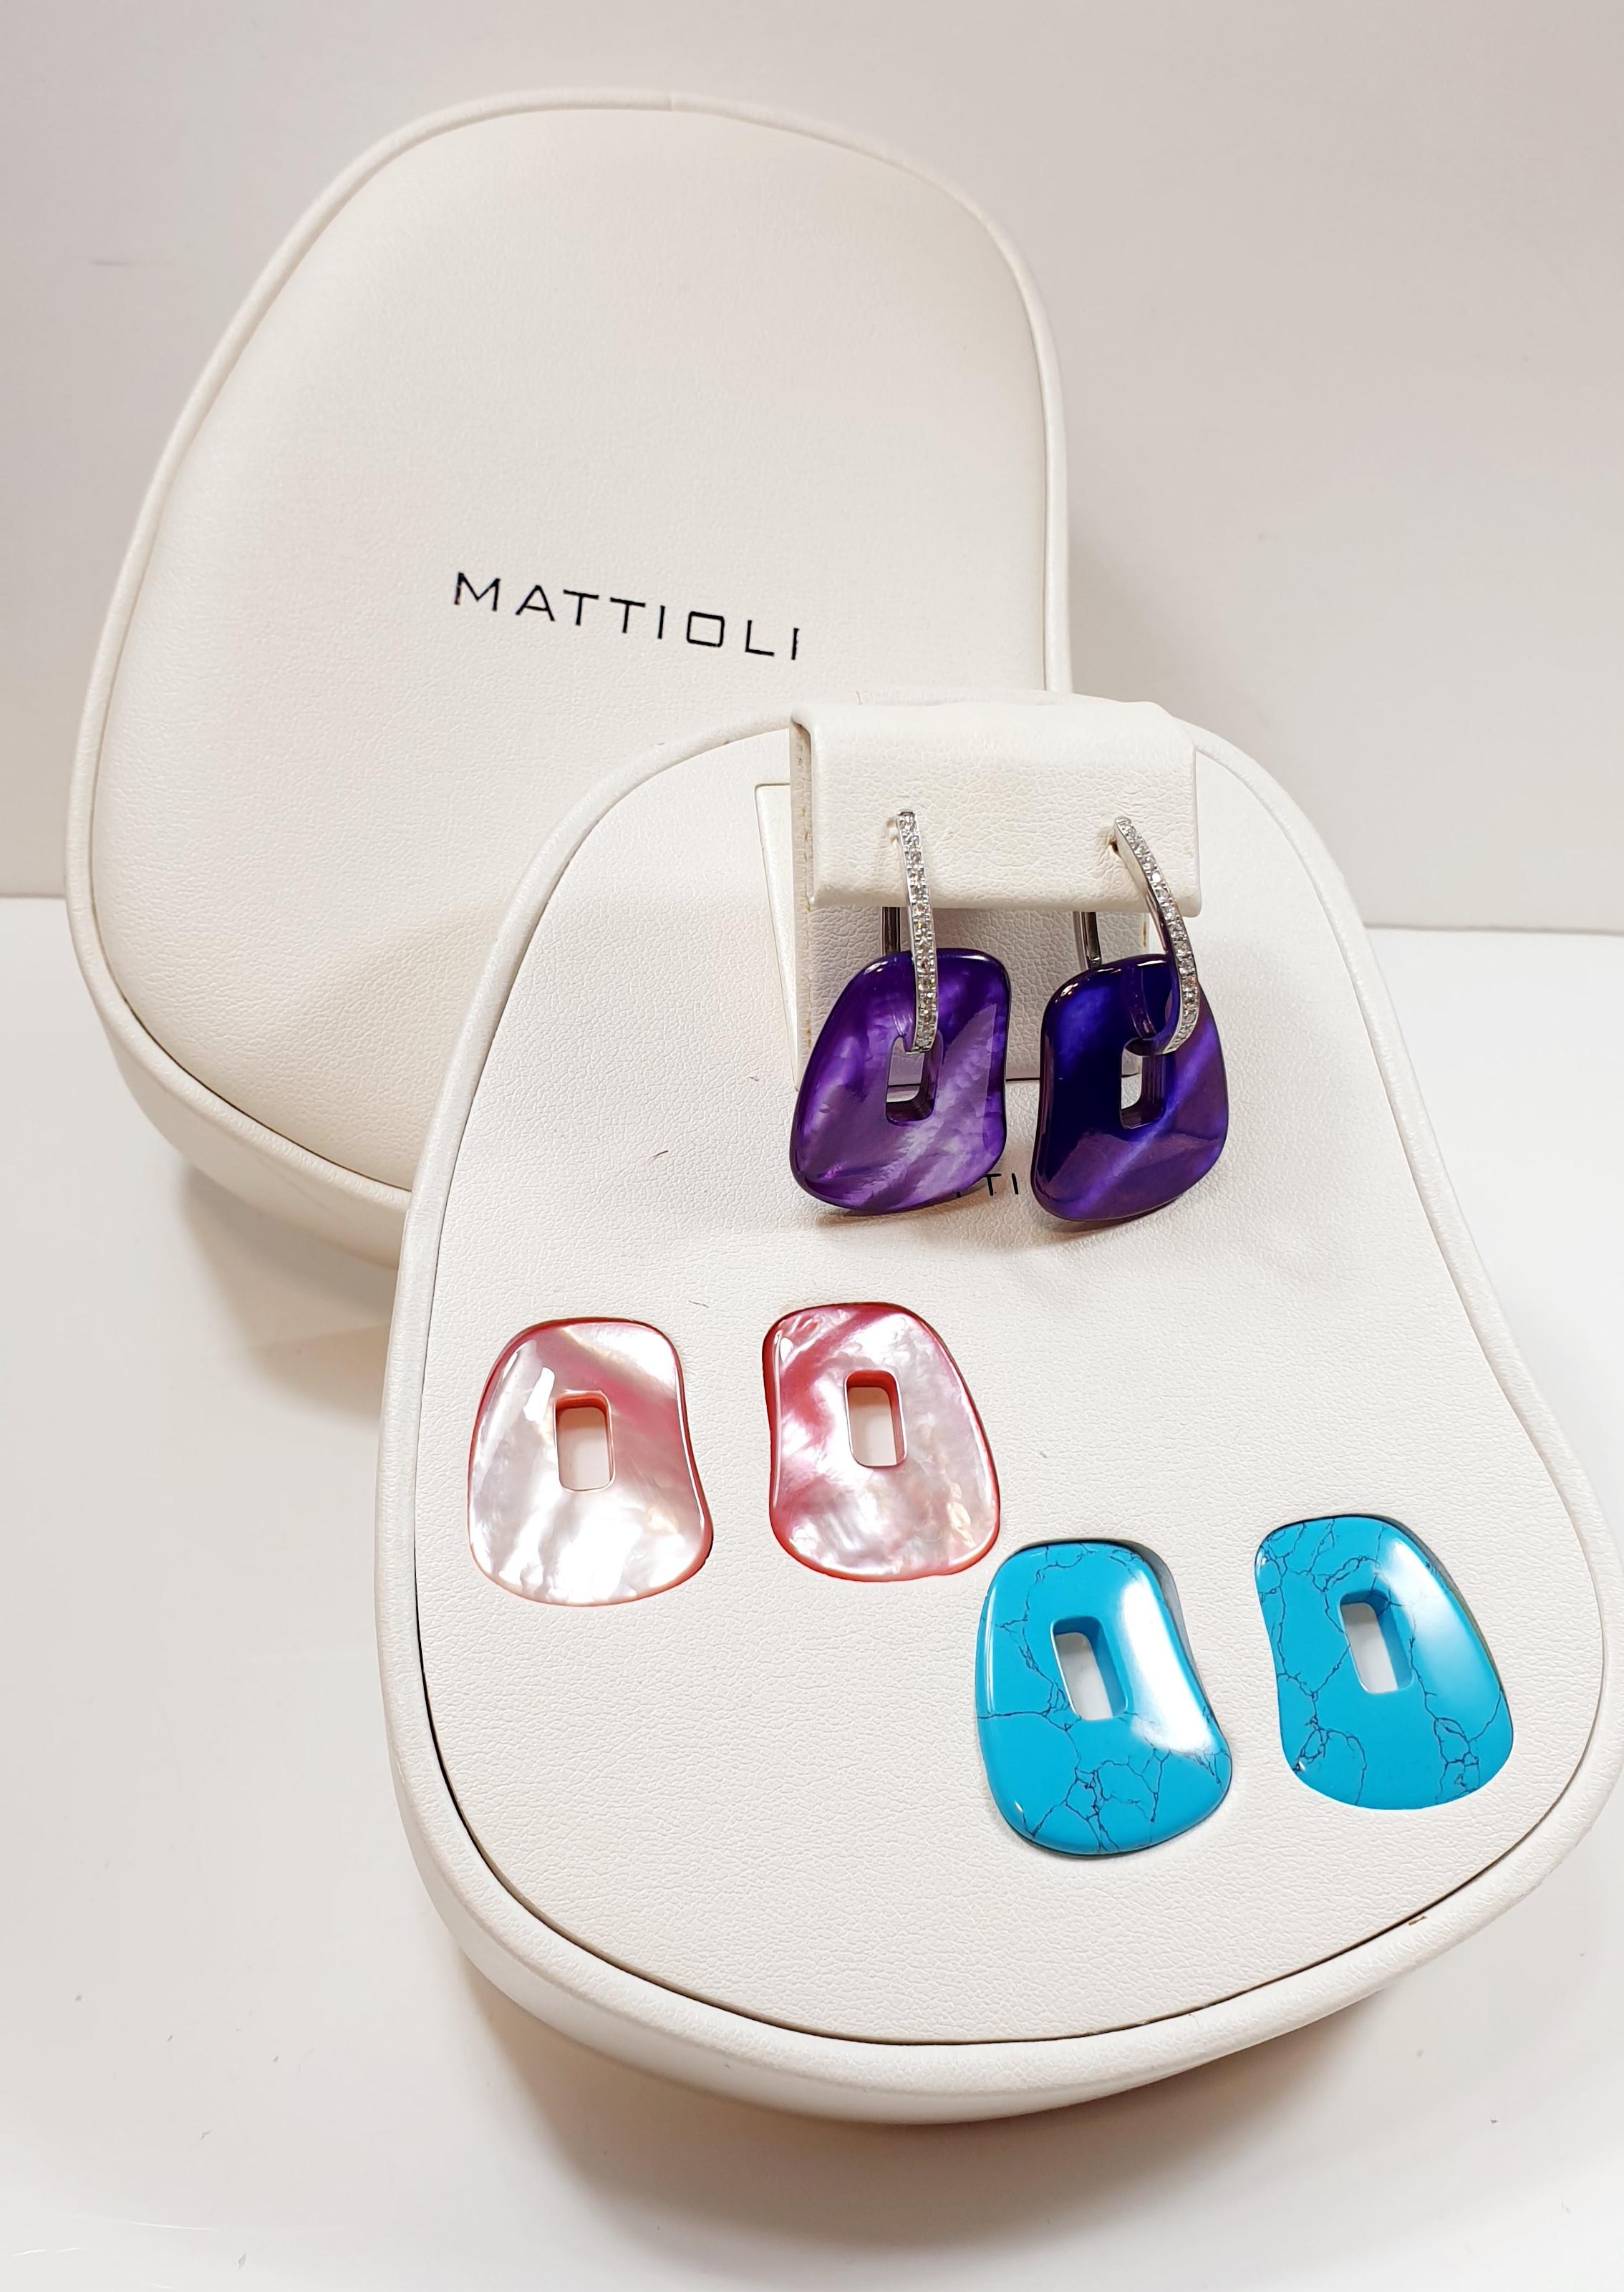 Mattioli Puzzle 18 Karat & White Diamonds Medium Size Earrings
Options in Yellow, Rose and white colour gold 
Puzzle Medium Earrings Box + Three Pairs Of Coloured Puzzles

Gold Weight 3.80gr.
Diamond carats: 0,40 ct
Measure 20x25mm or 0.78x0.98